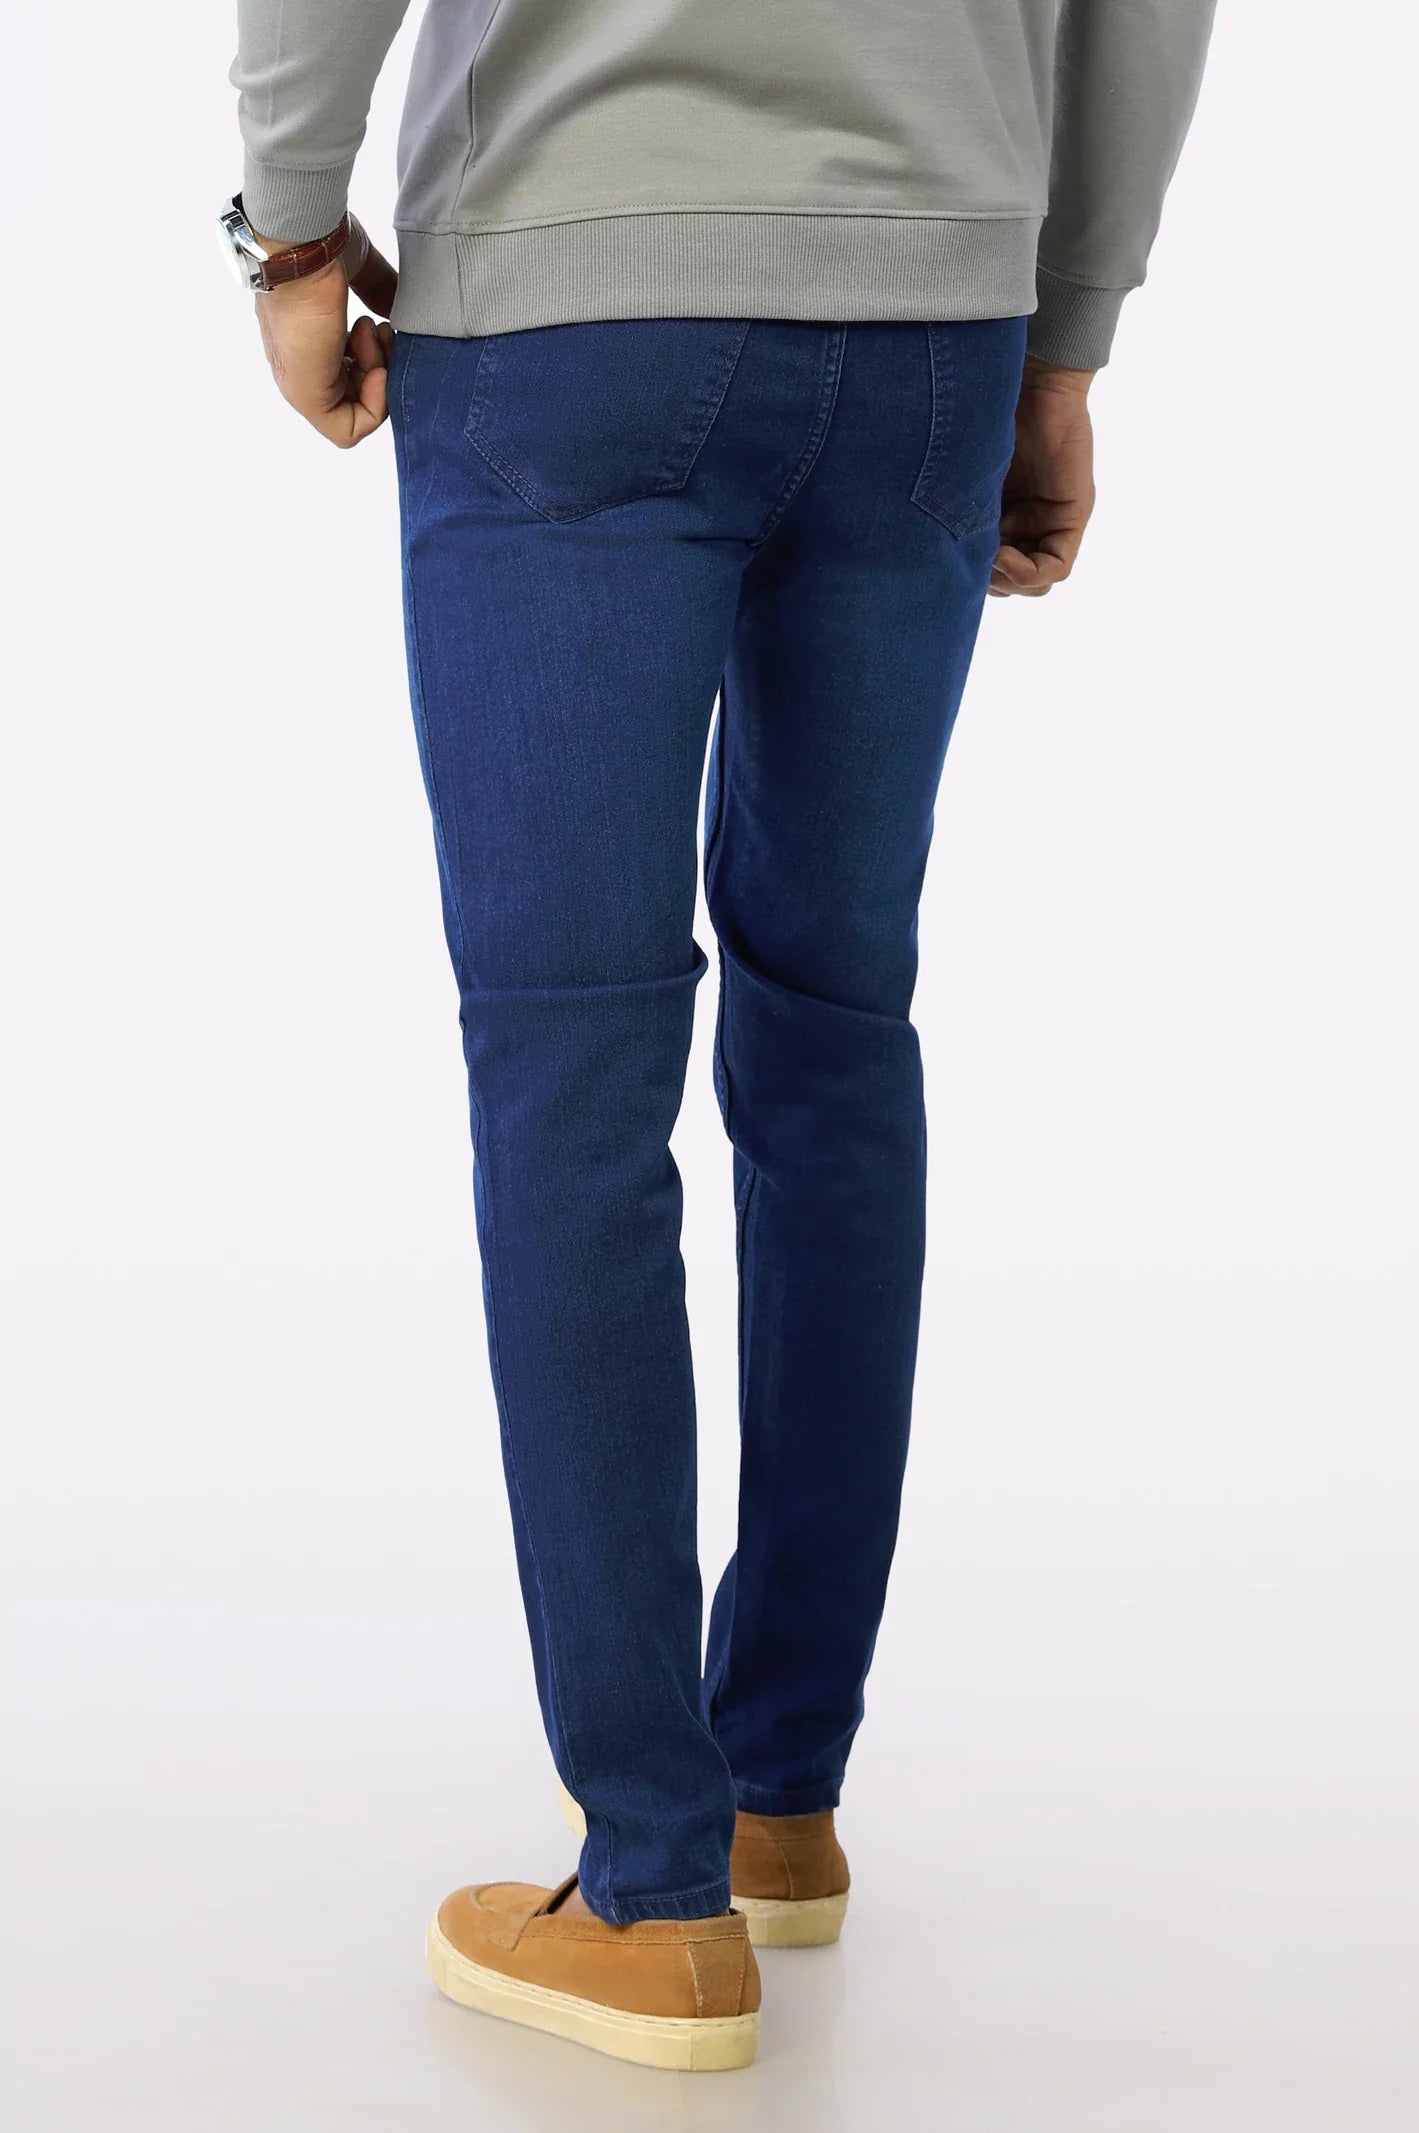 Blue Slim Fit Denim Jeans From Diners